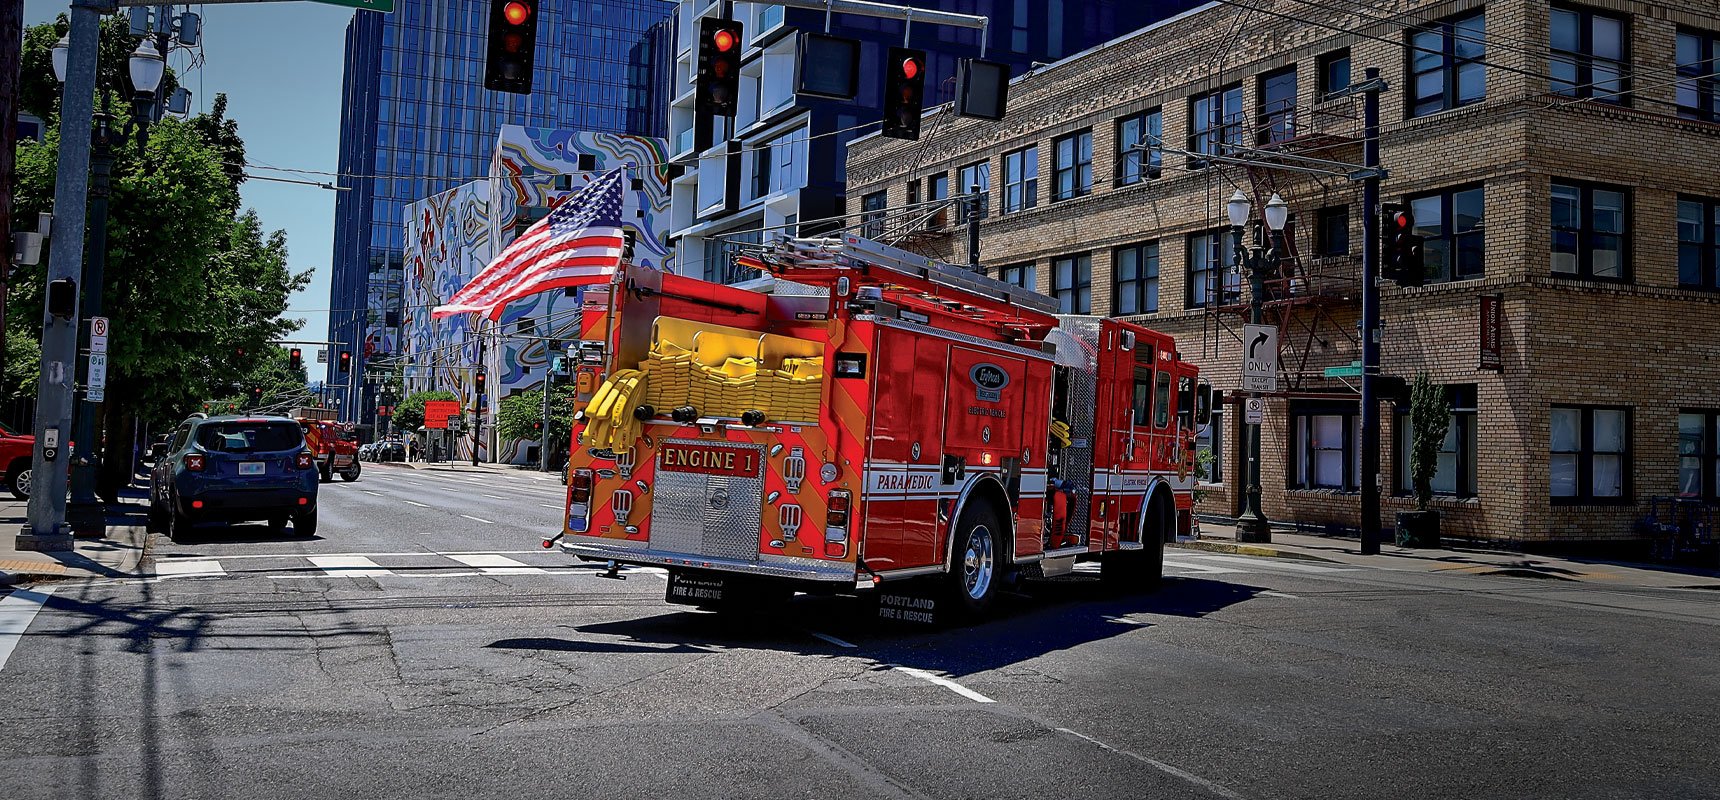 A red high voltage electric fire truck turns a corner at a city intersection.  